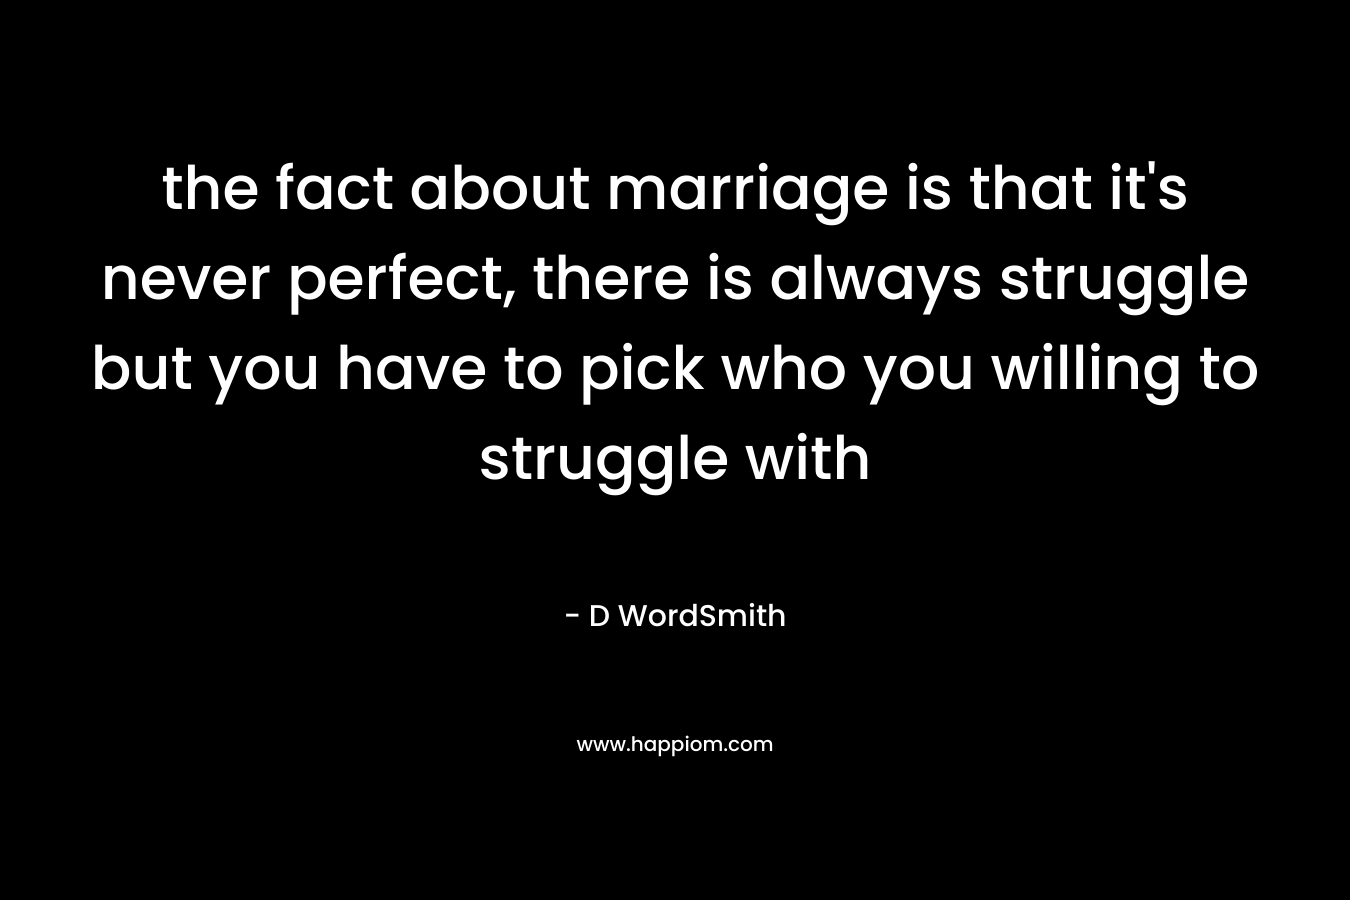 the fact about marriage is that it’s never perfect, there is always struggle but you have to pick who you willing to struggle with – D WordSmith